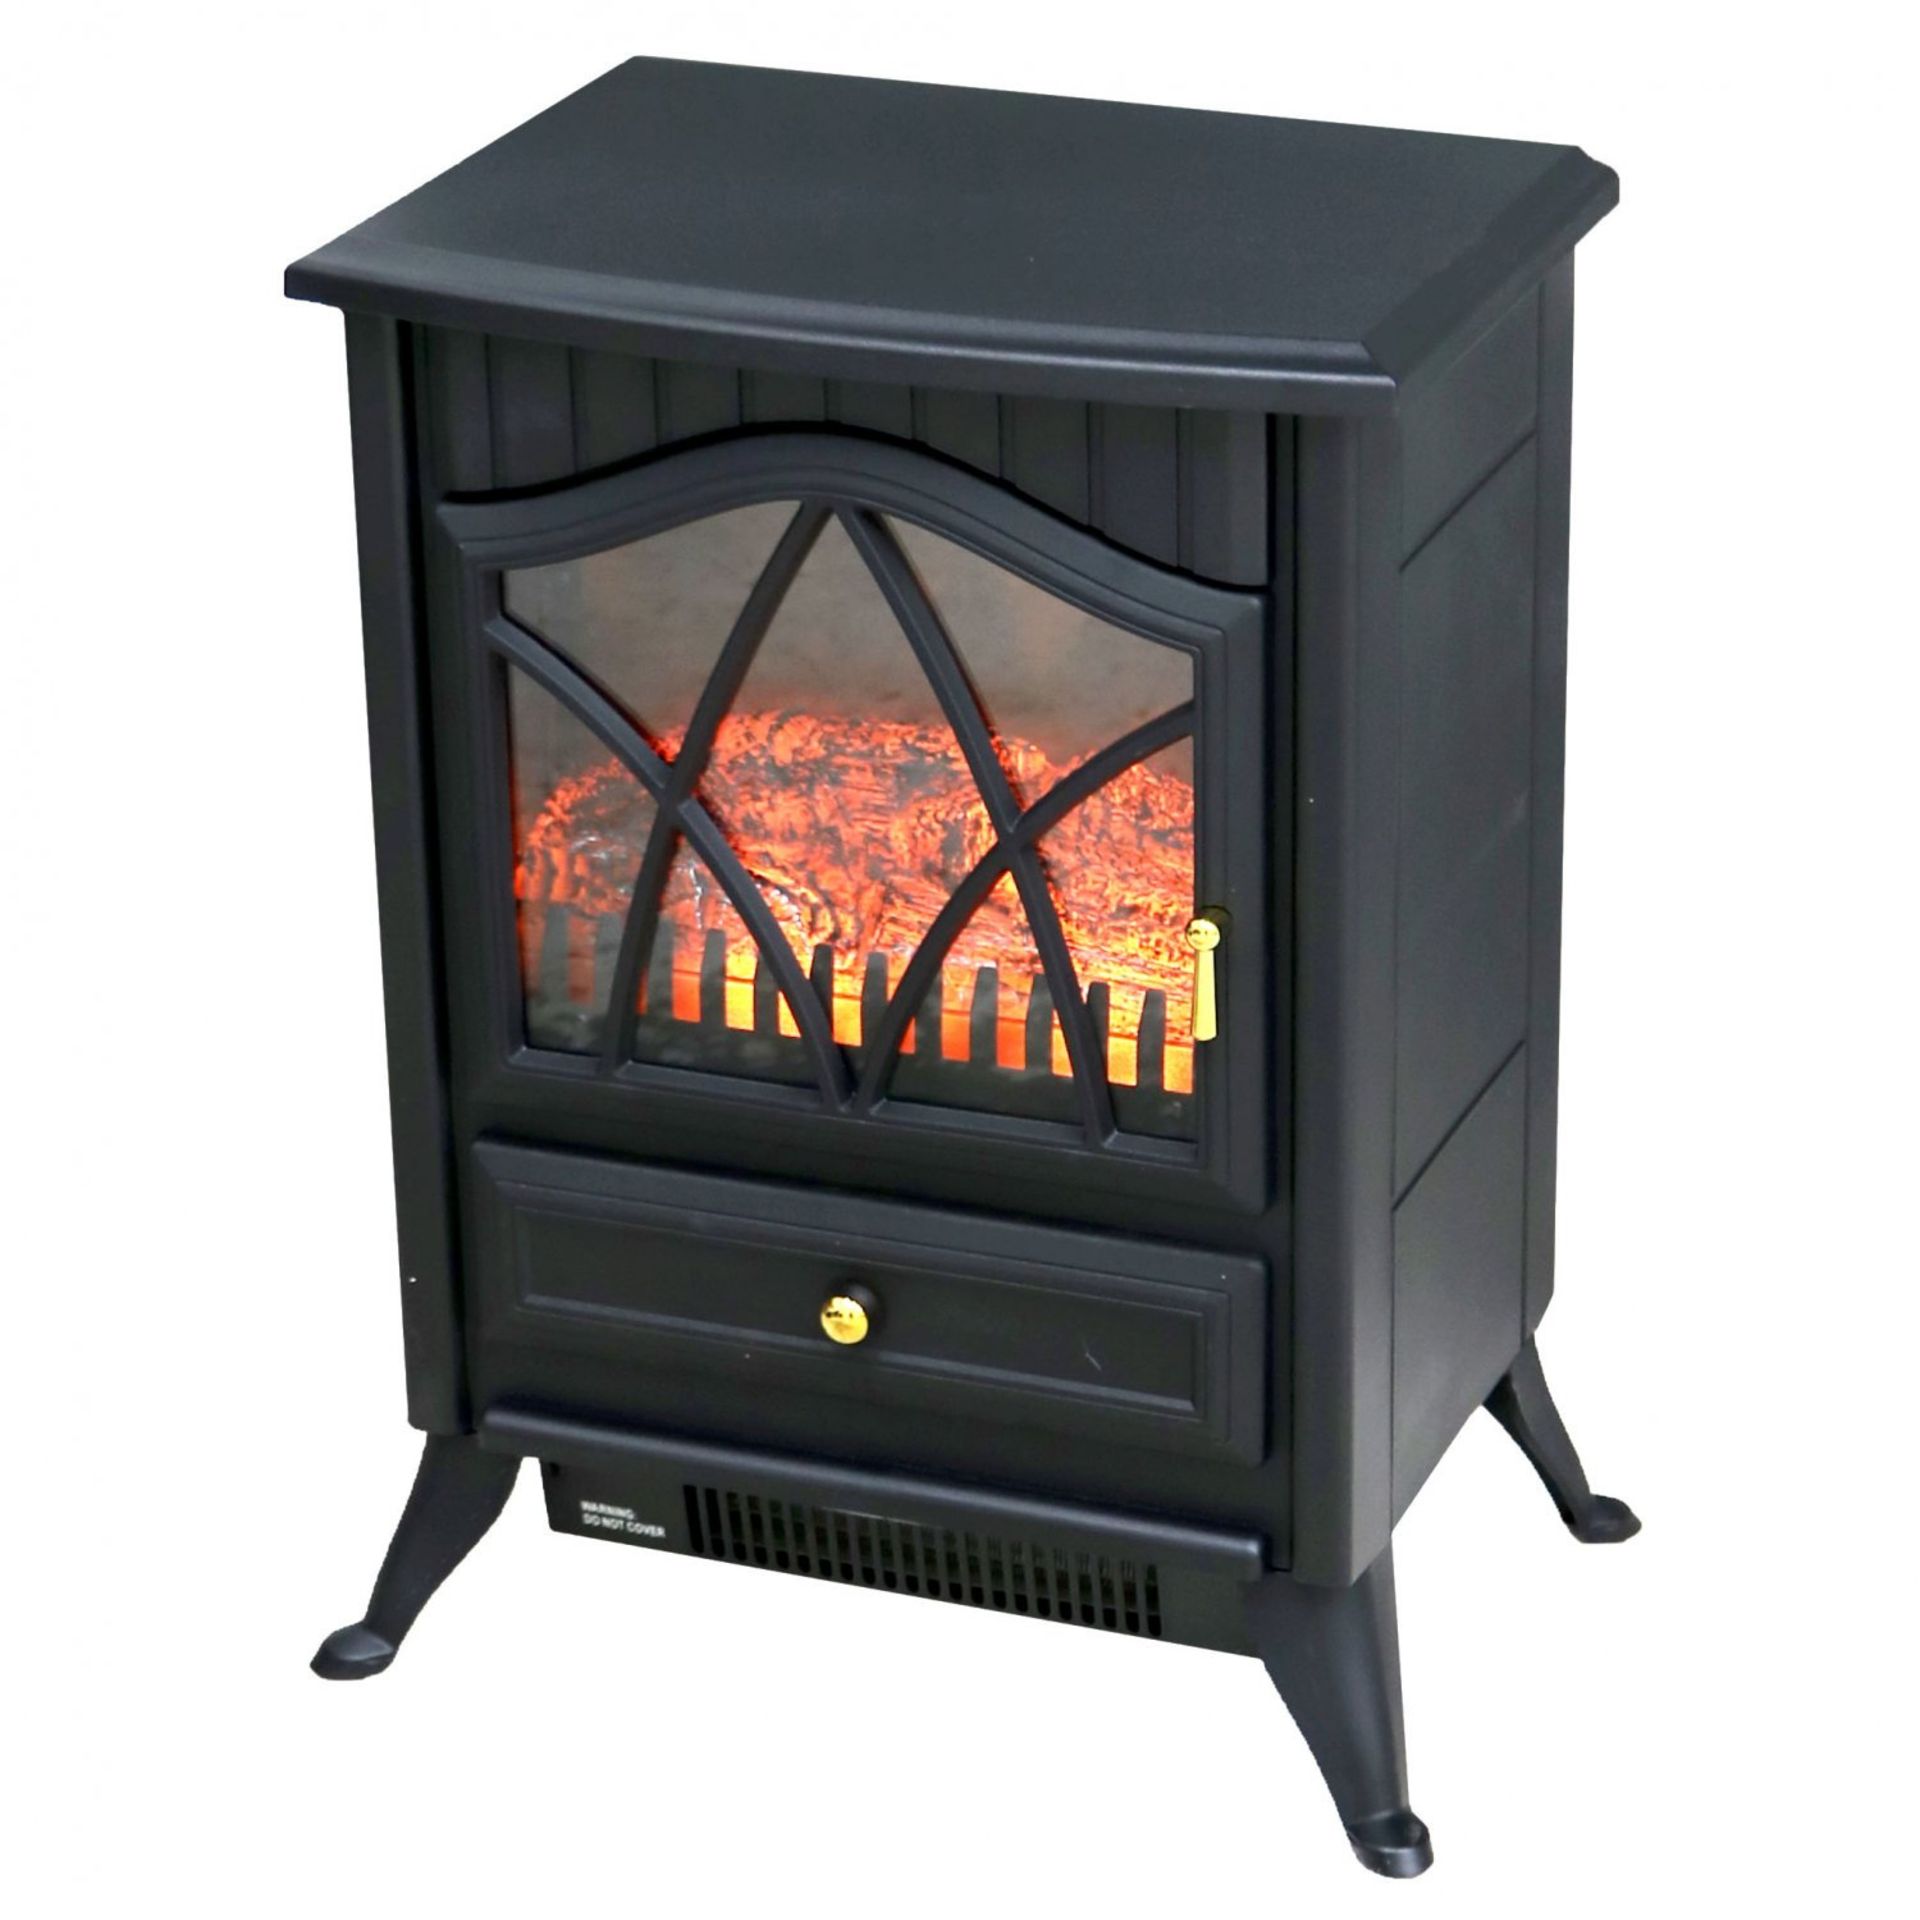 (D10) 1850W Log Burner Flame Effect Electric Fireplace Stove Heater Power: 950W / 1850W - Dime...